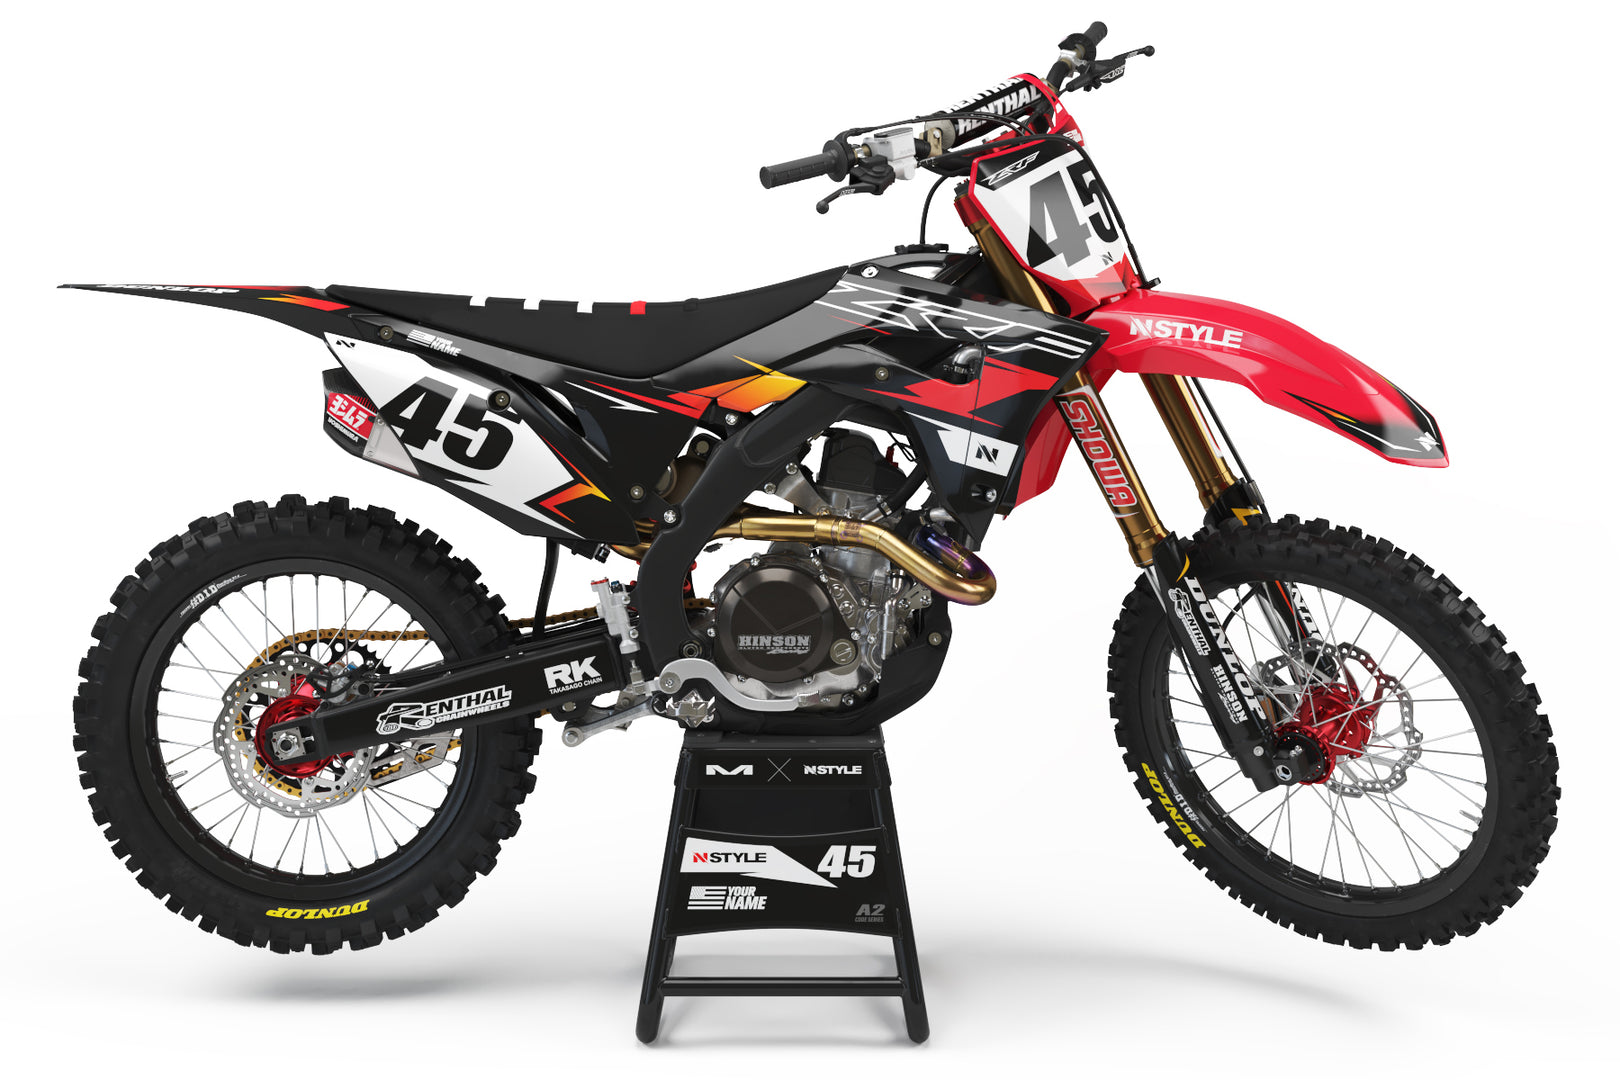 ATTACK Graphic Kit for HONDA - RED / BLACK / FADE